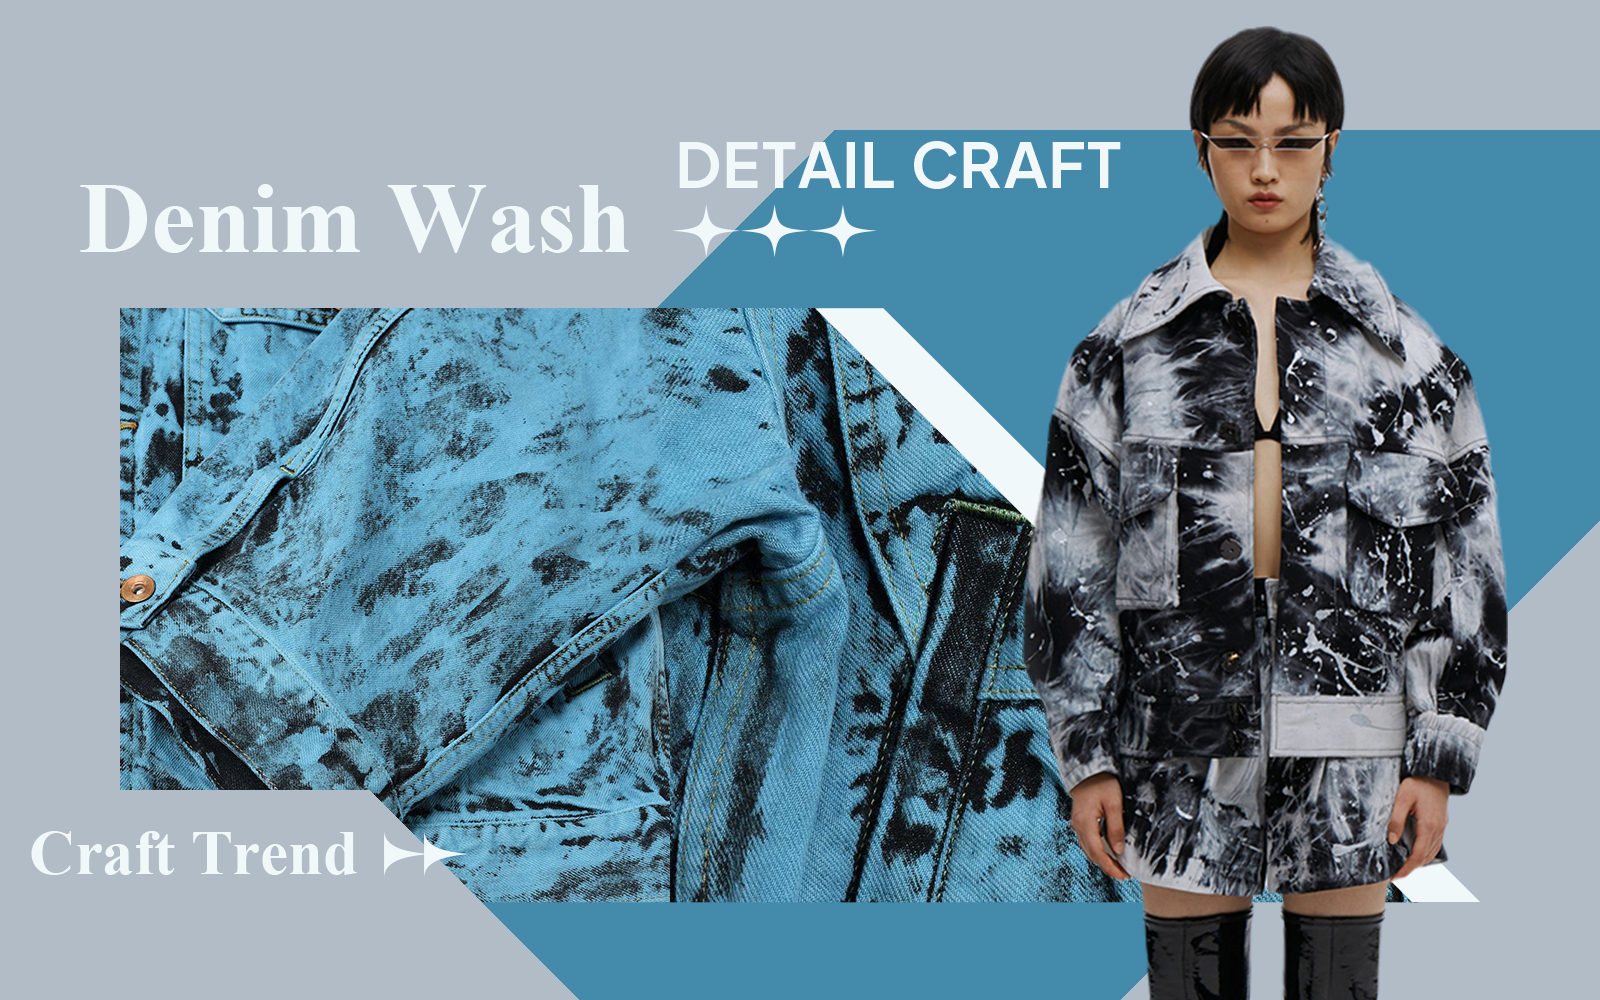 The Craft Trend for Denim Wash